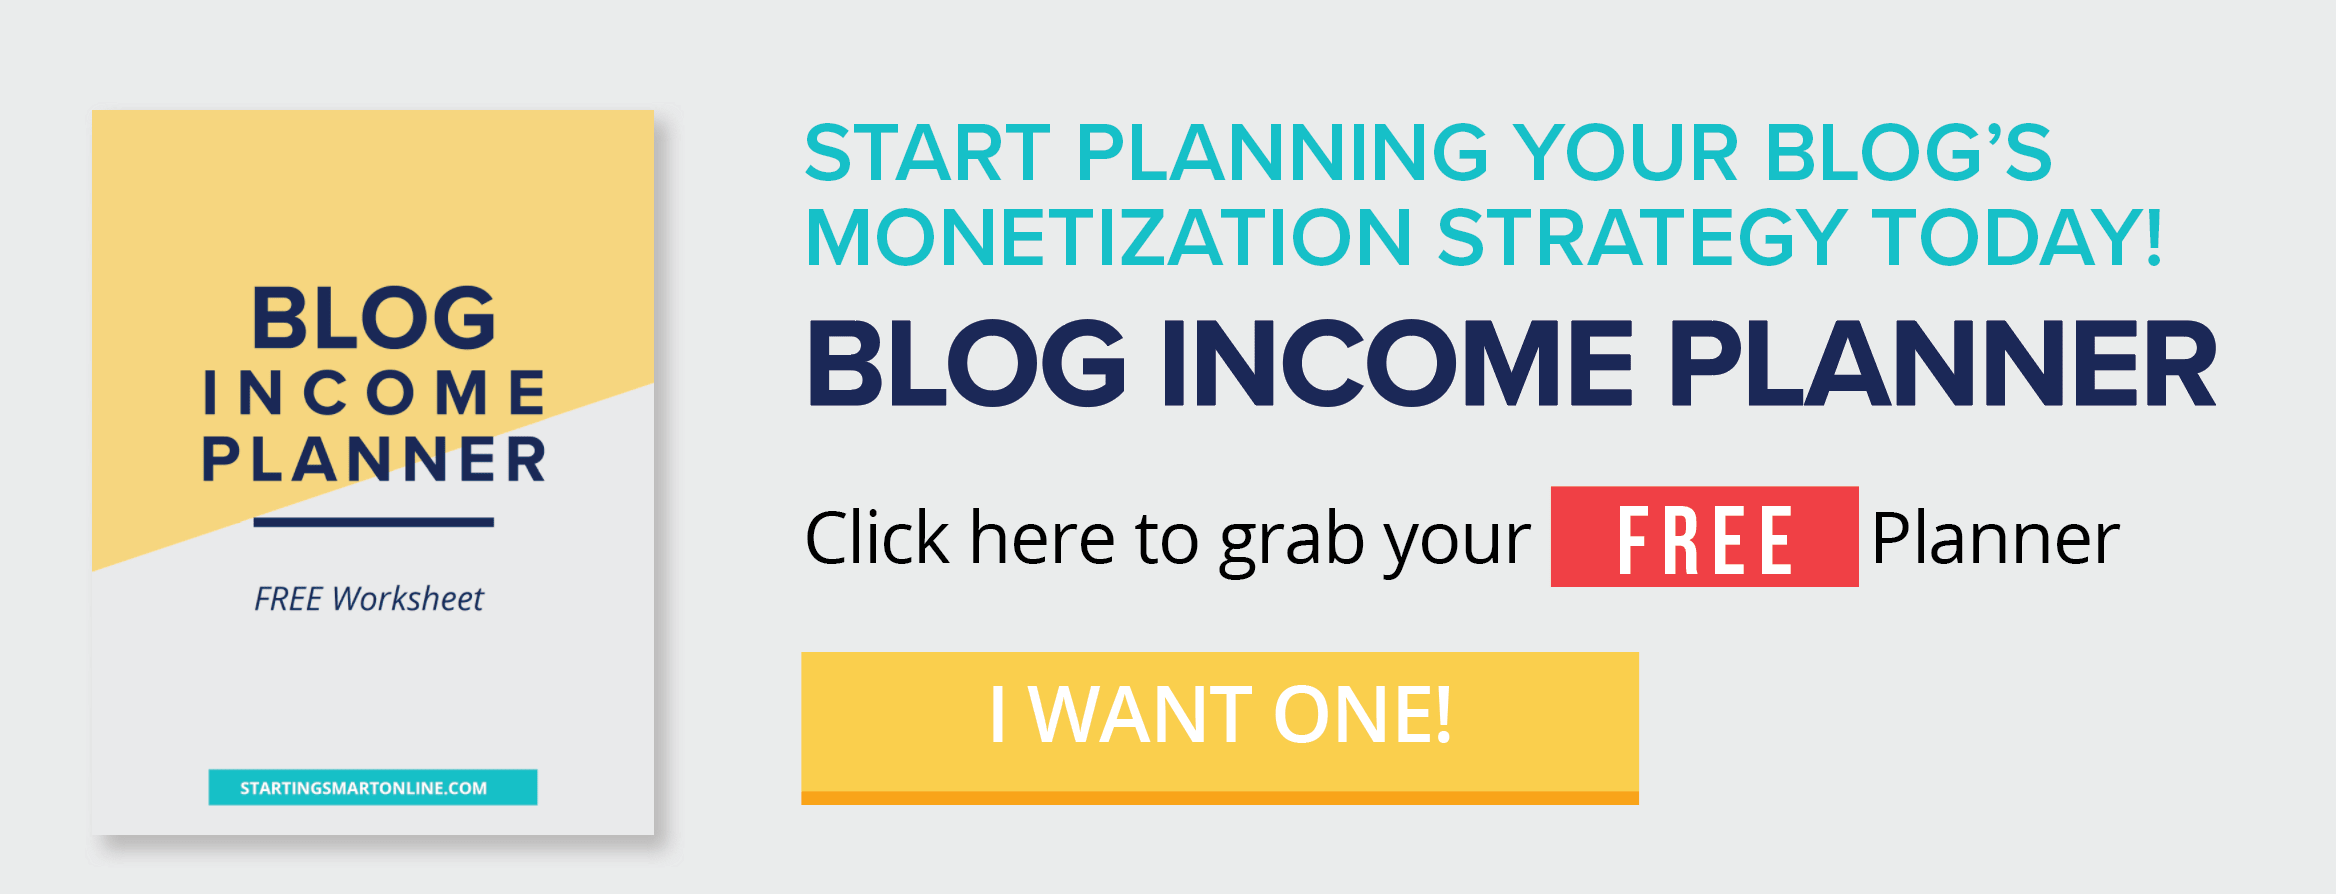 Blog Income Planner